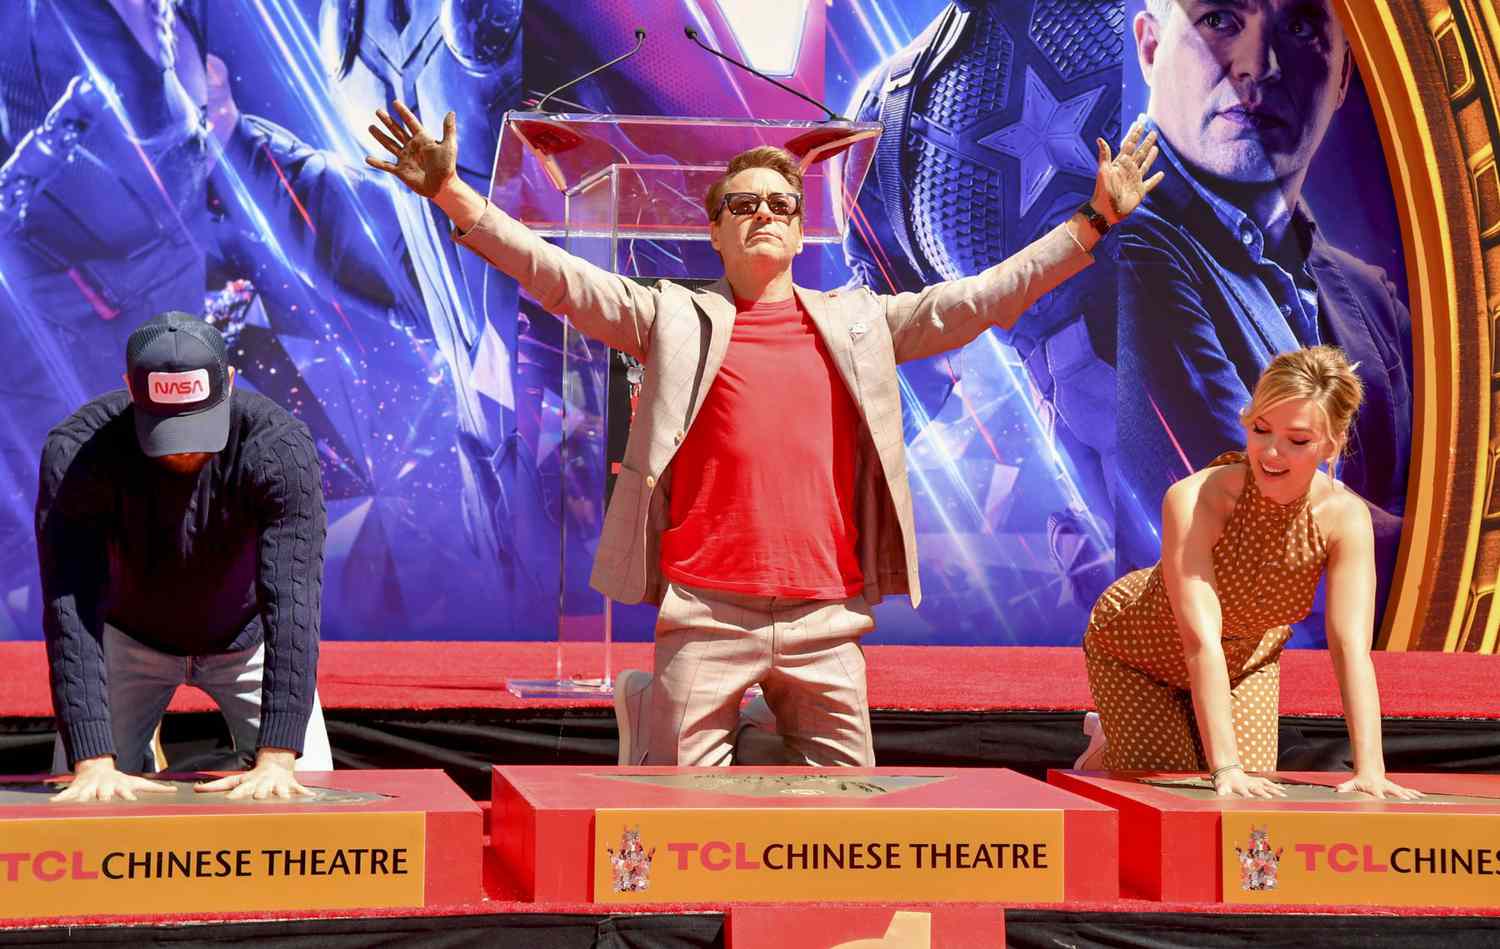 HOLLYWOOD, CALIFORNIA - APRIL 23: (L-R) Chris Evans, Robert Downey Jr., and Scarlett Johansson attend the Marvel Studios' "Avengers: Endgame" cast place their hand prints in cement at TCL Chinese Theatre IMAX Forecourt at TCL Chinese Theatre IMAX on April 23, 2019 in Hollywood, California.California. (Photo by Jeff Kravitz/FilmMagic)